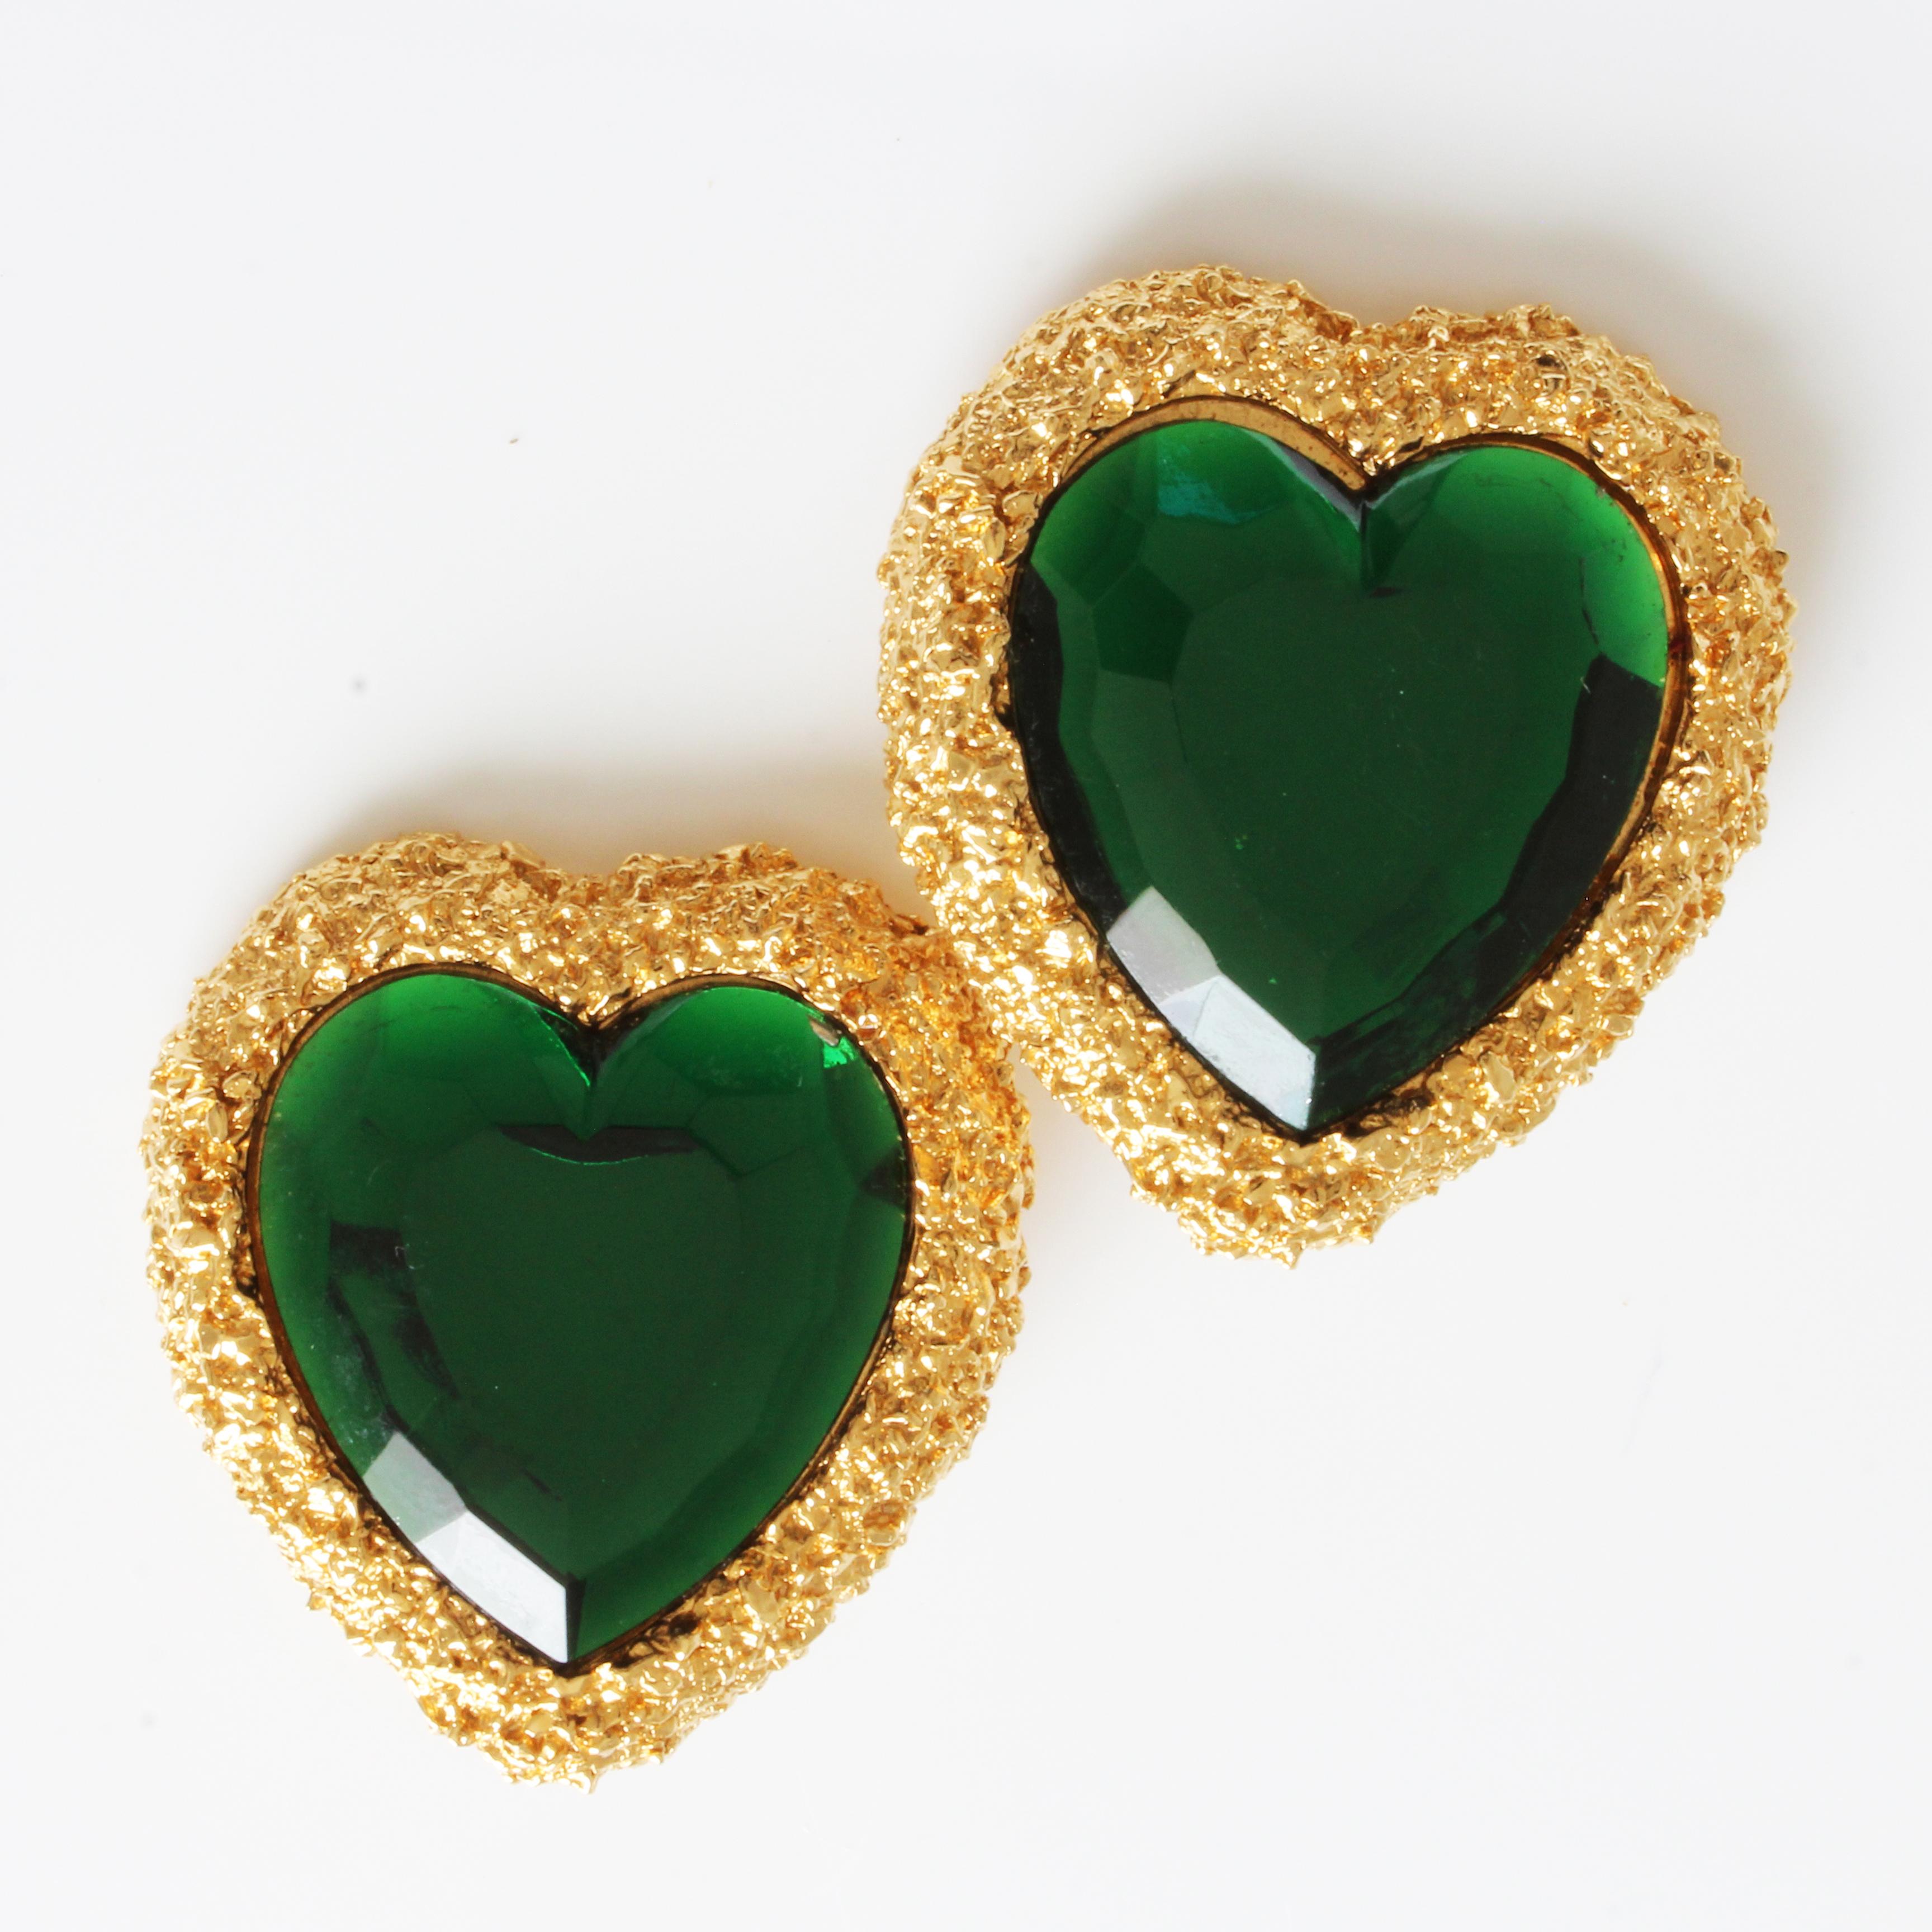 D'Orlan Earrings Oversized Heart Shape Statement Emerald Green and Gold 1980s  In Good Condition For Sale In Port Saint Lucie, FL